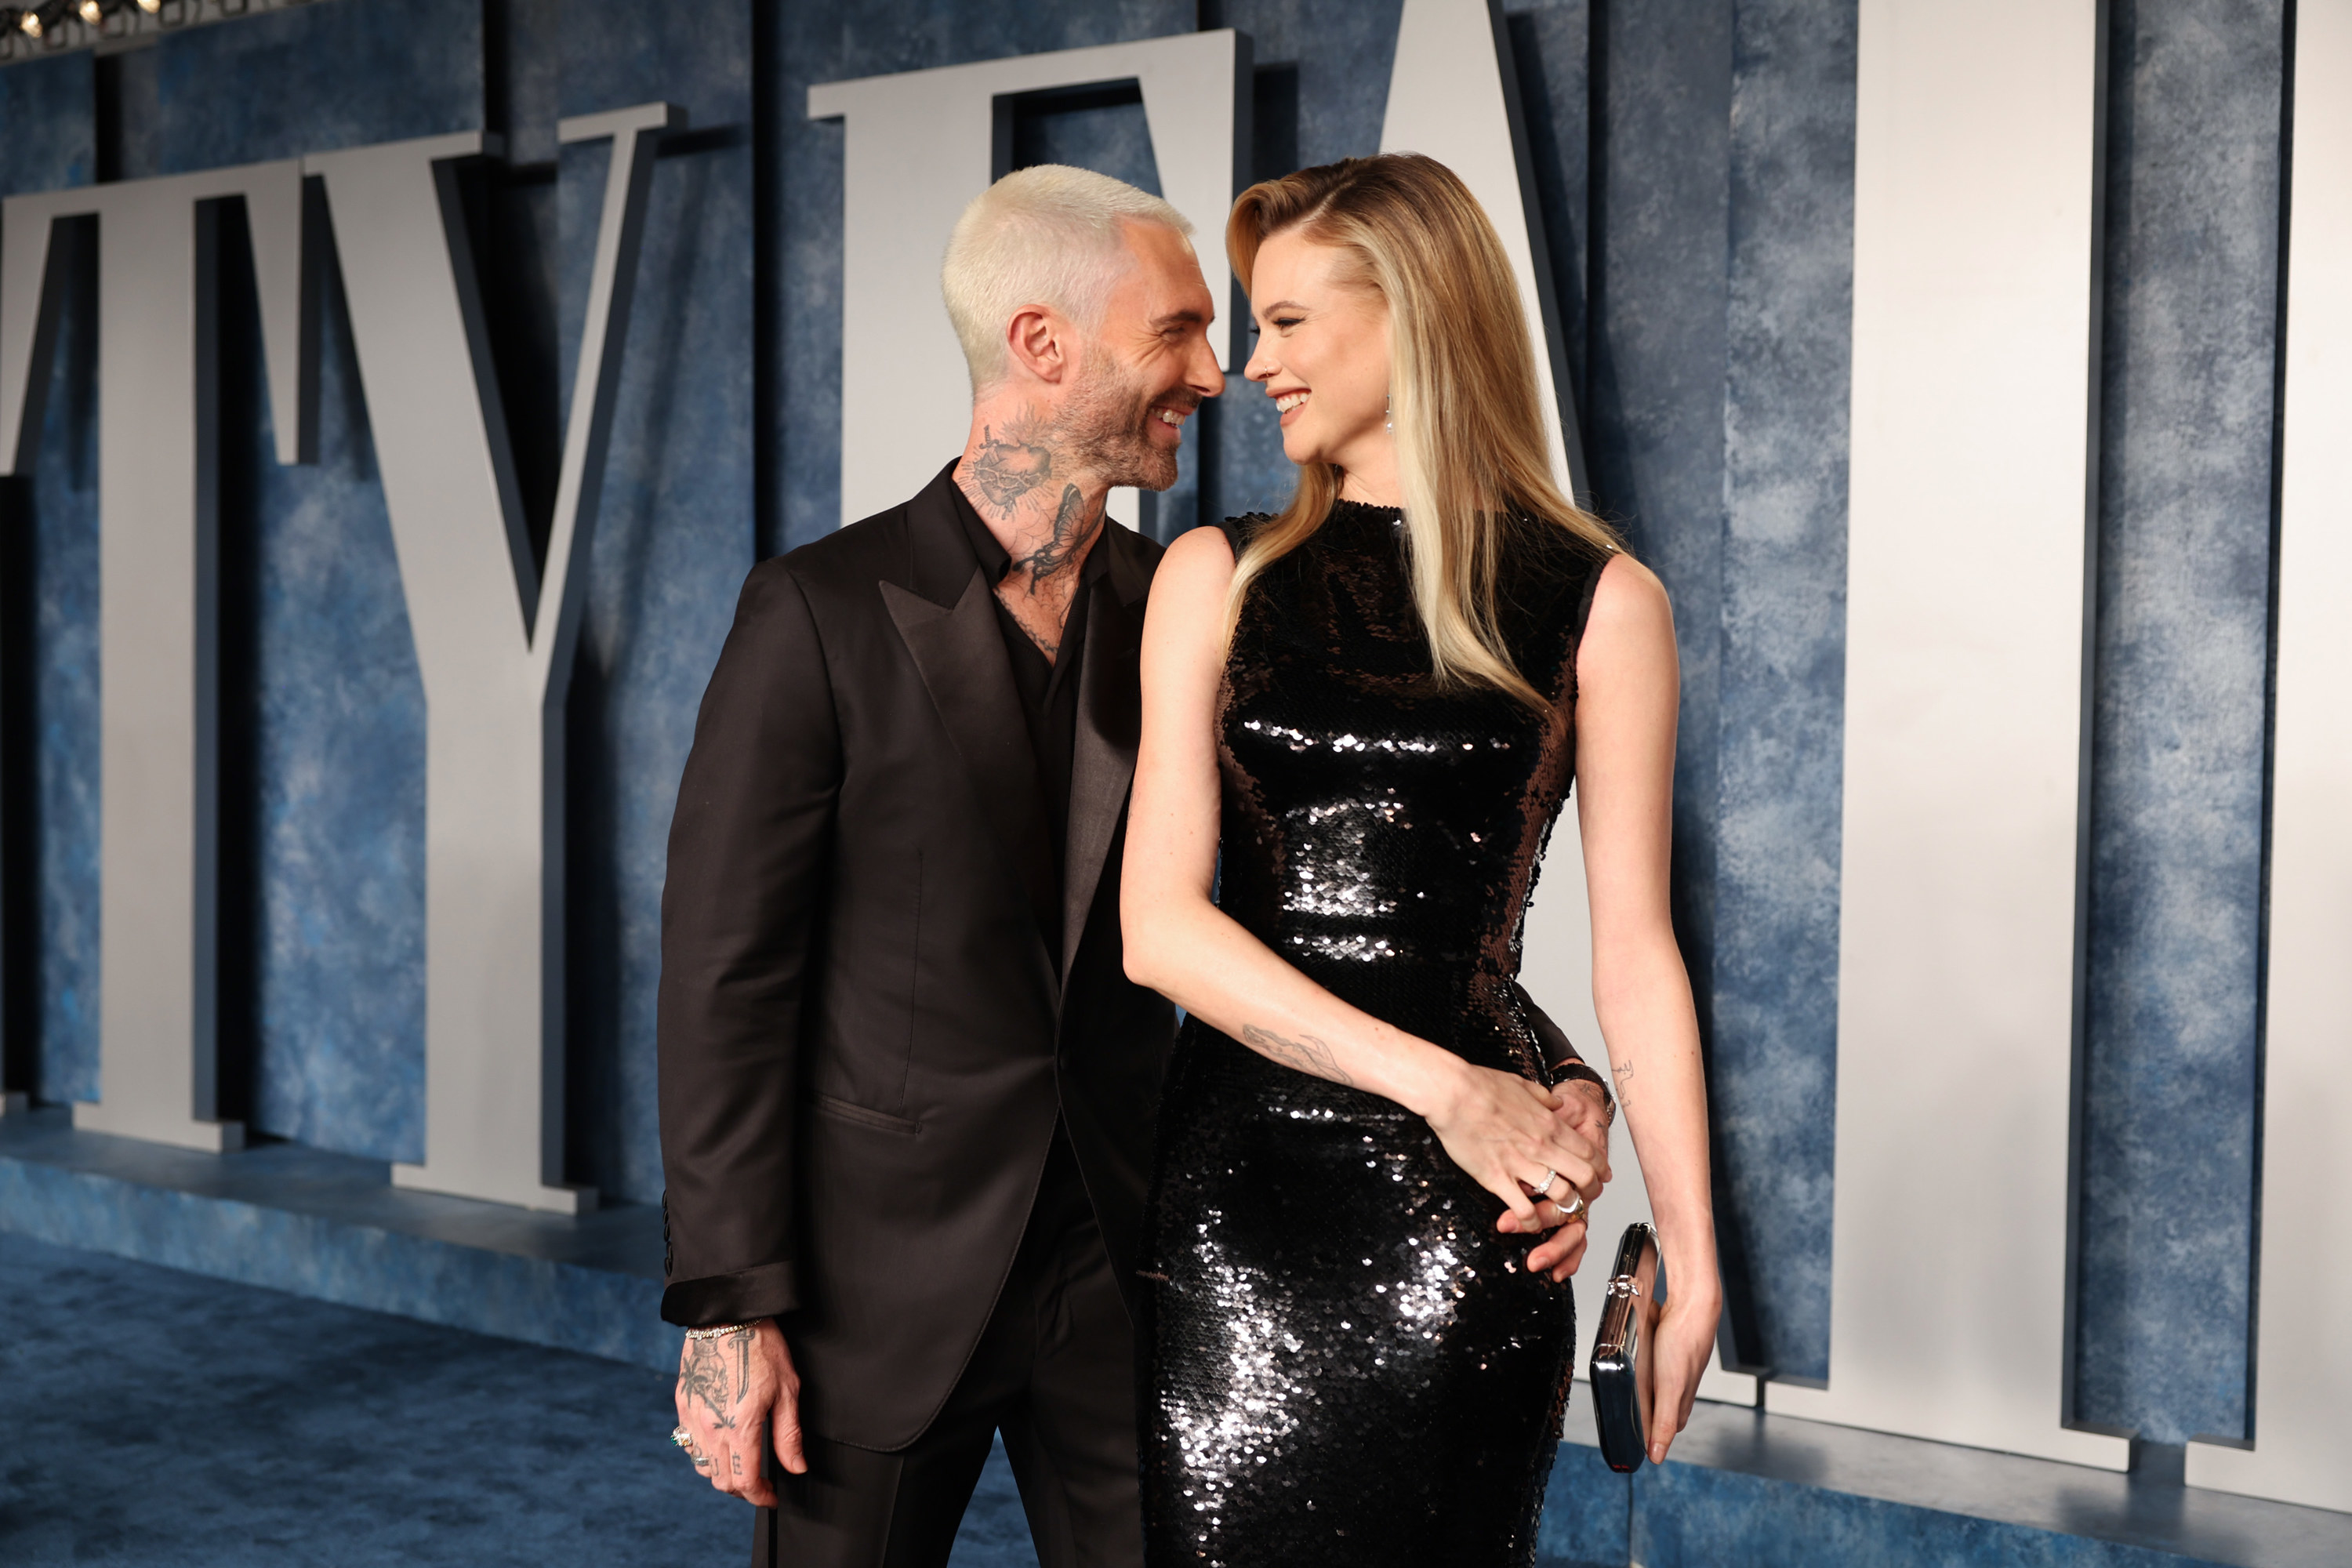 Adam and Behati smiling at each other